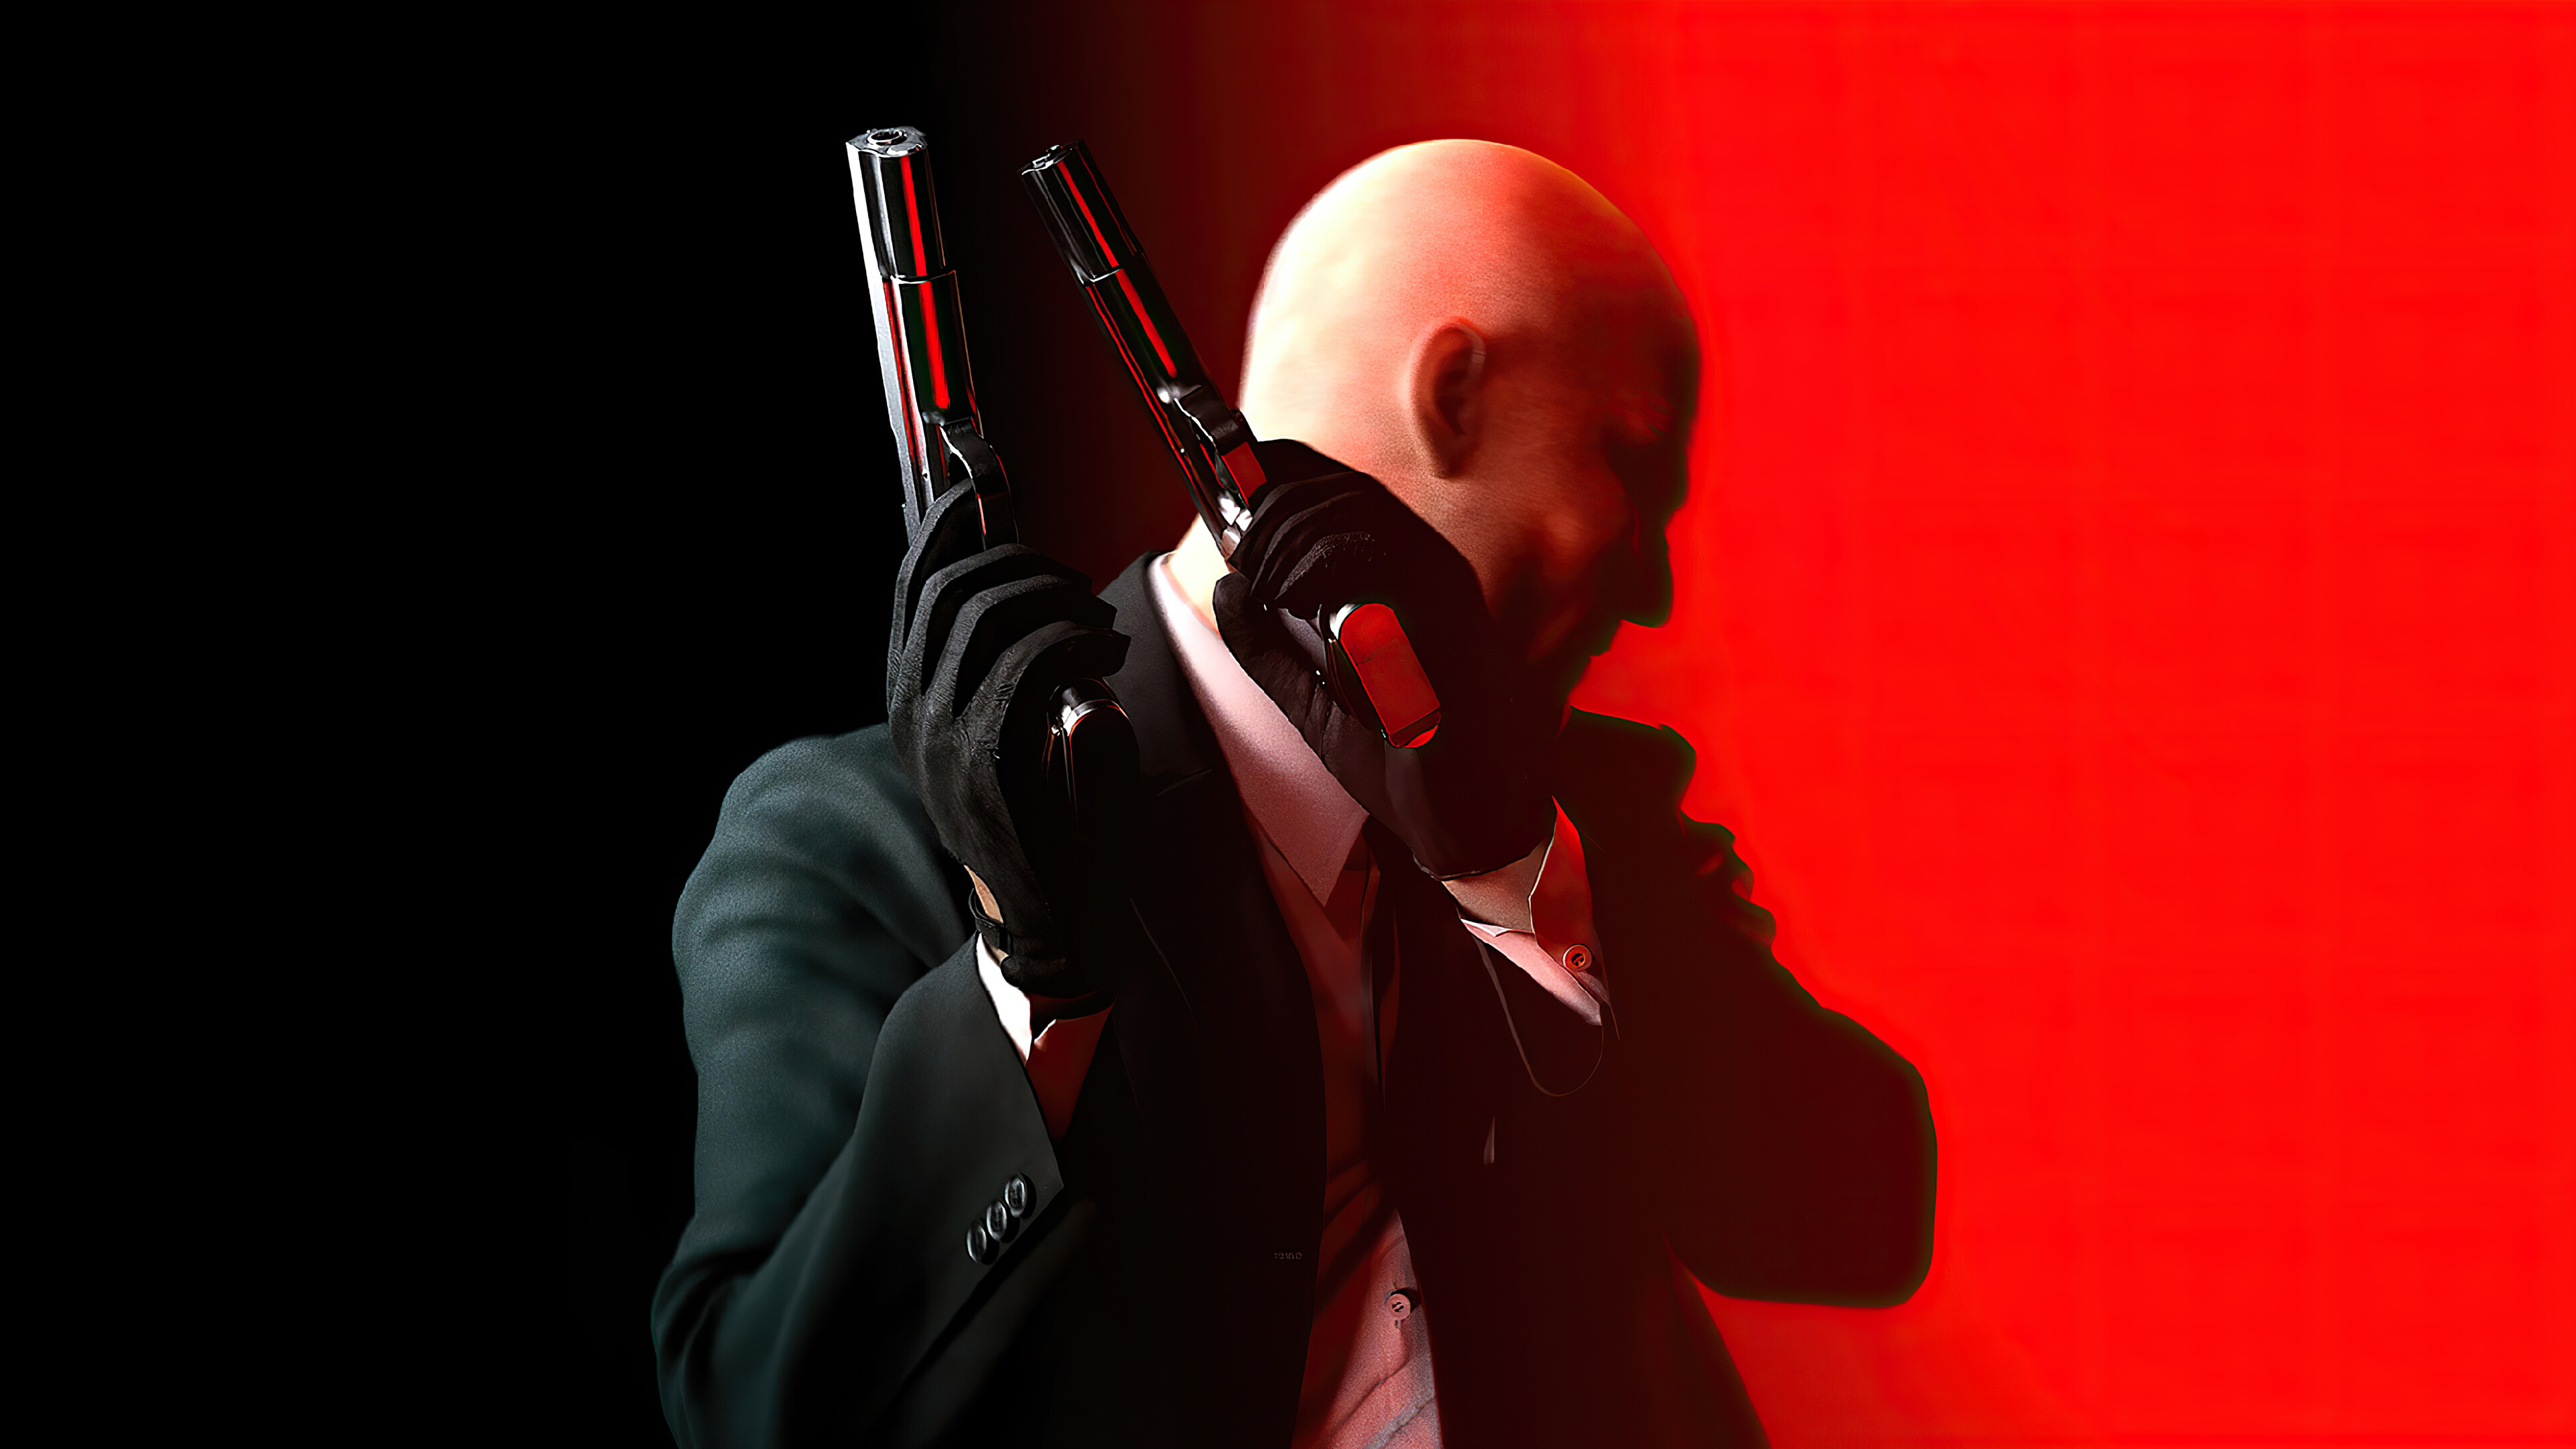 Hitman Absolution 4K wallpapers, High-resolution images, Action-packed scenes, Intense gunfights, 3840x2160 4K Desktop